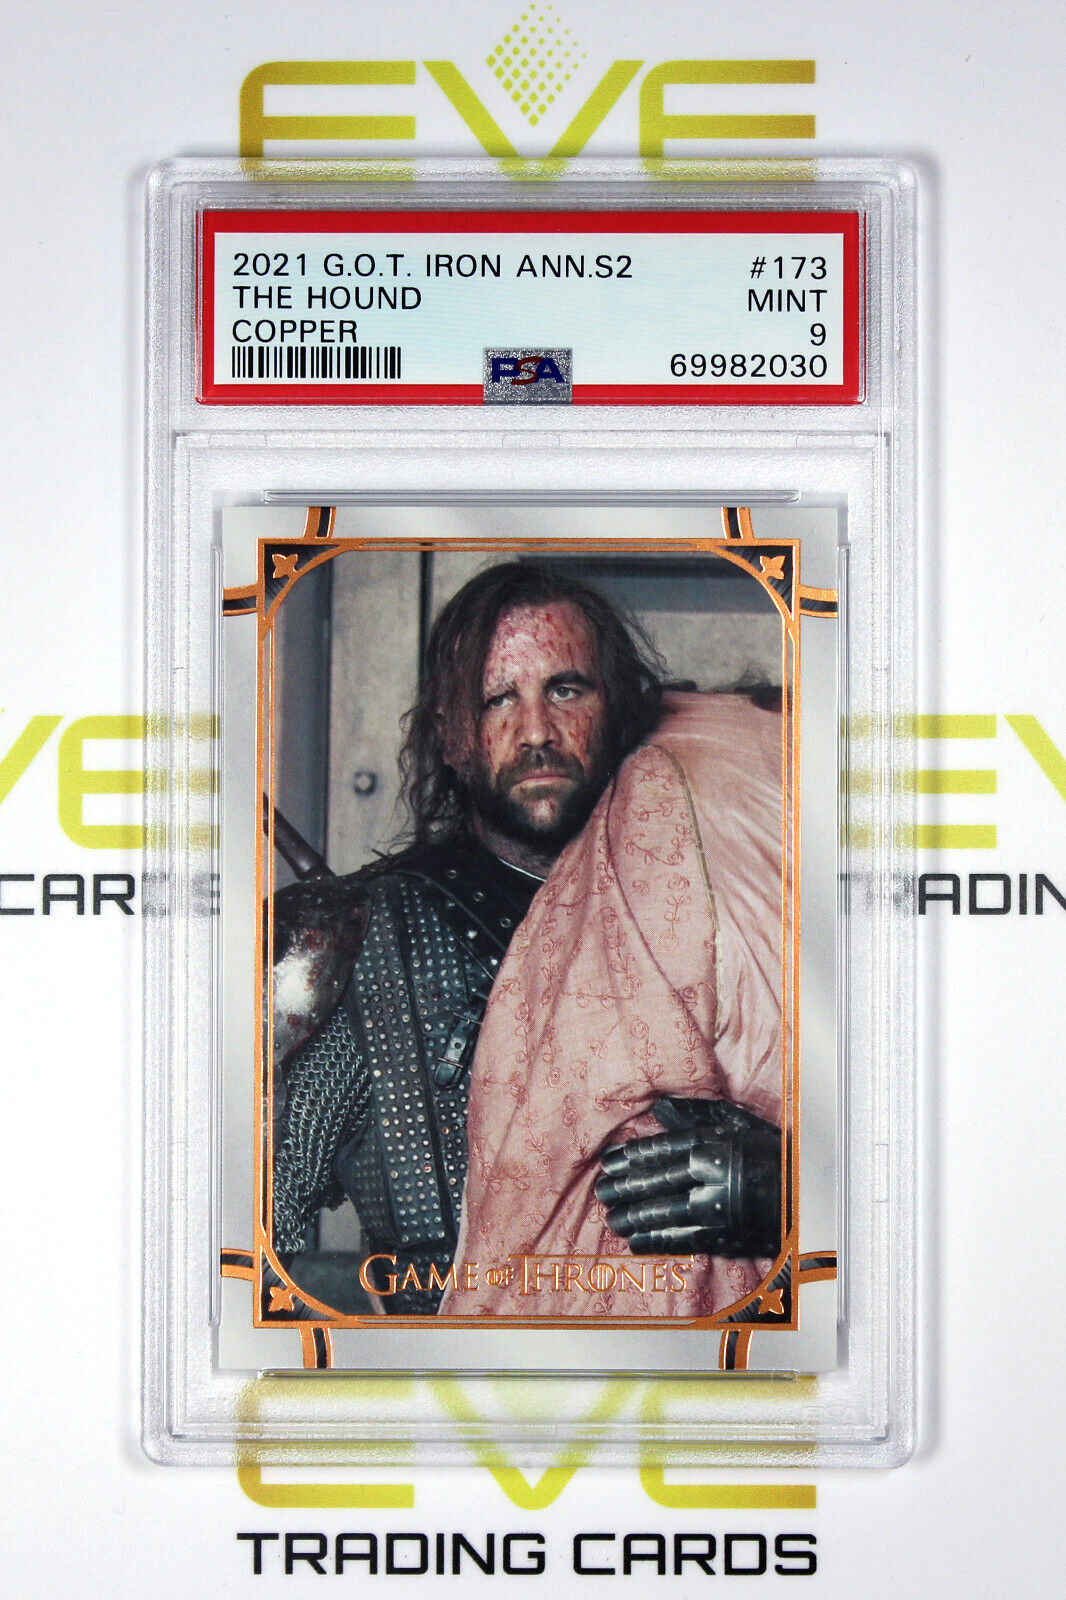 Graded Game of Thrones Card - #173 2021 The Hound - Copper /199 - PSA 9